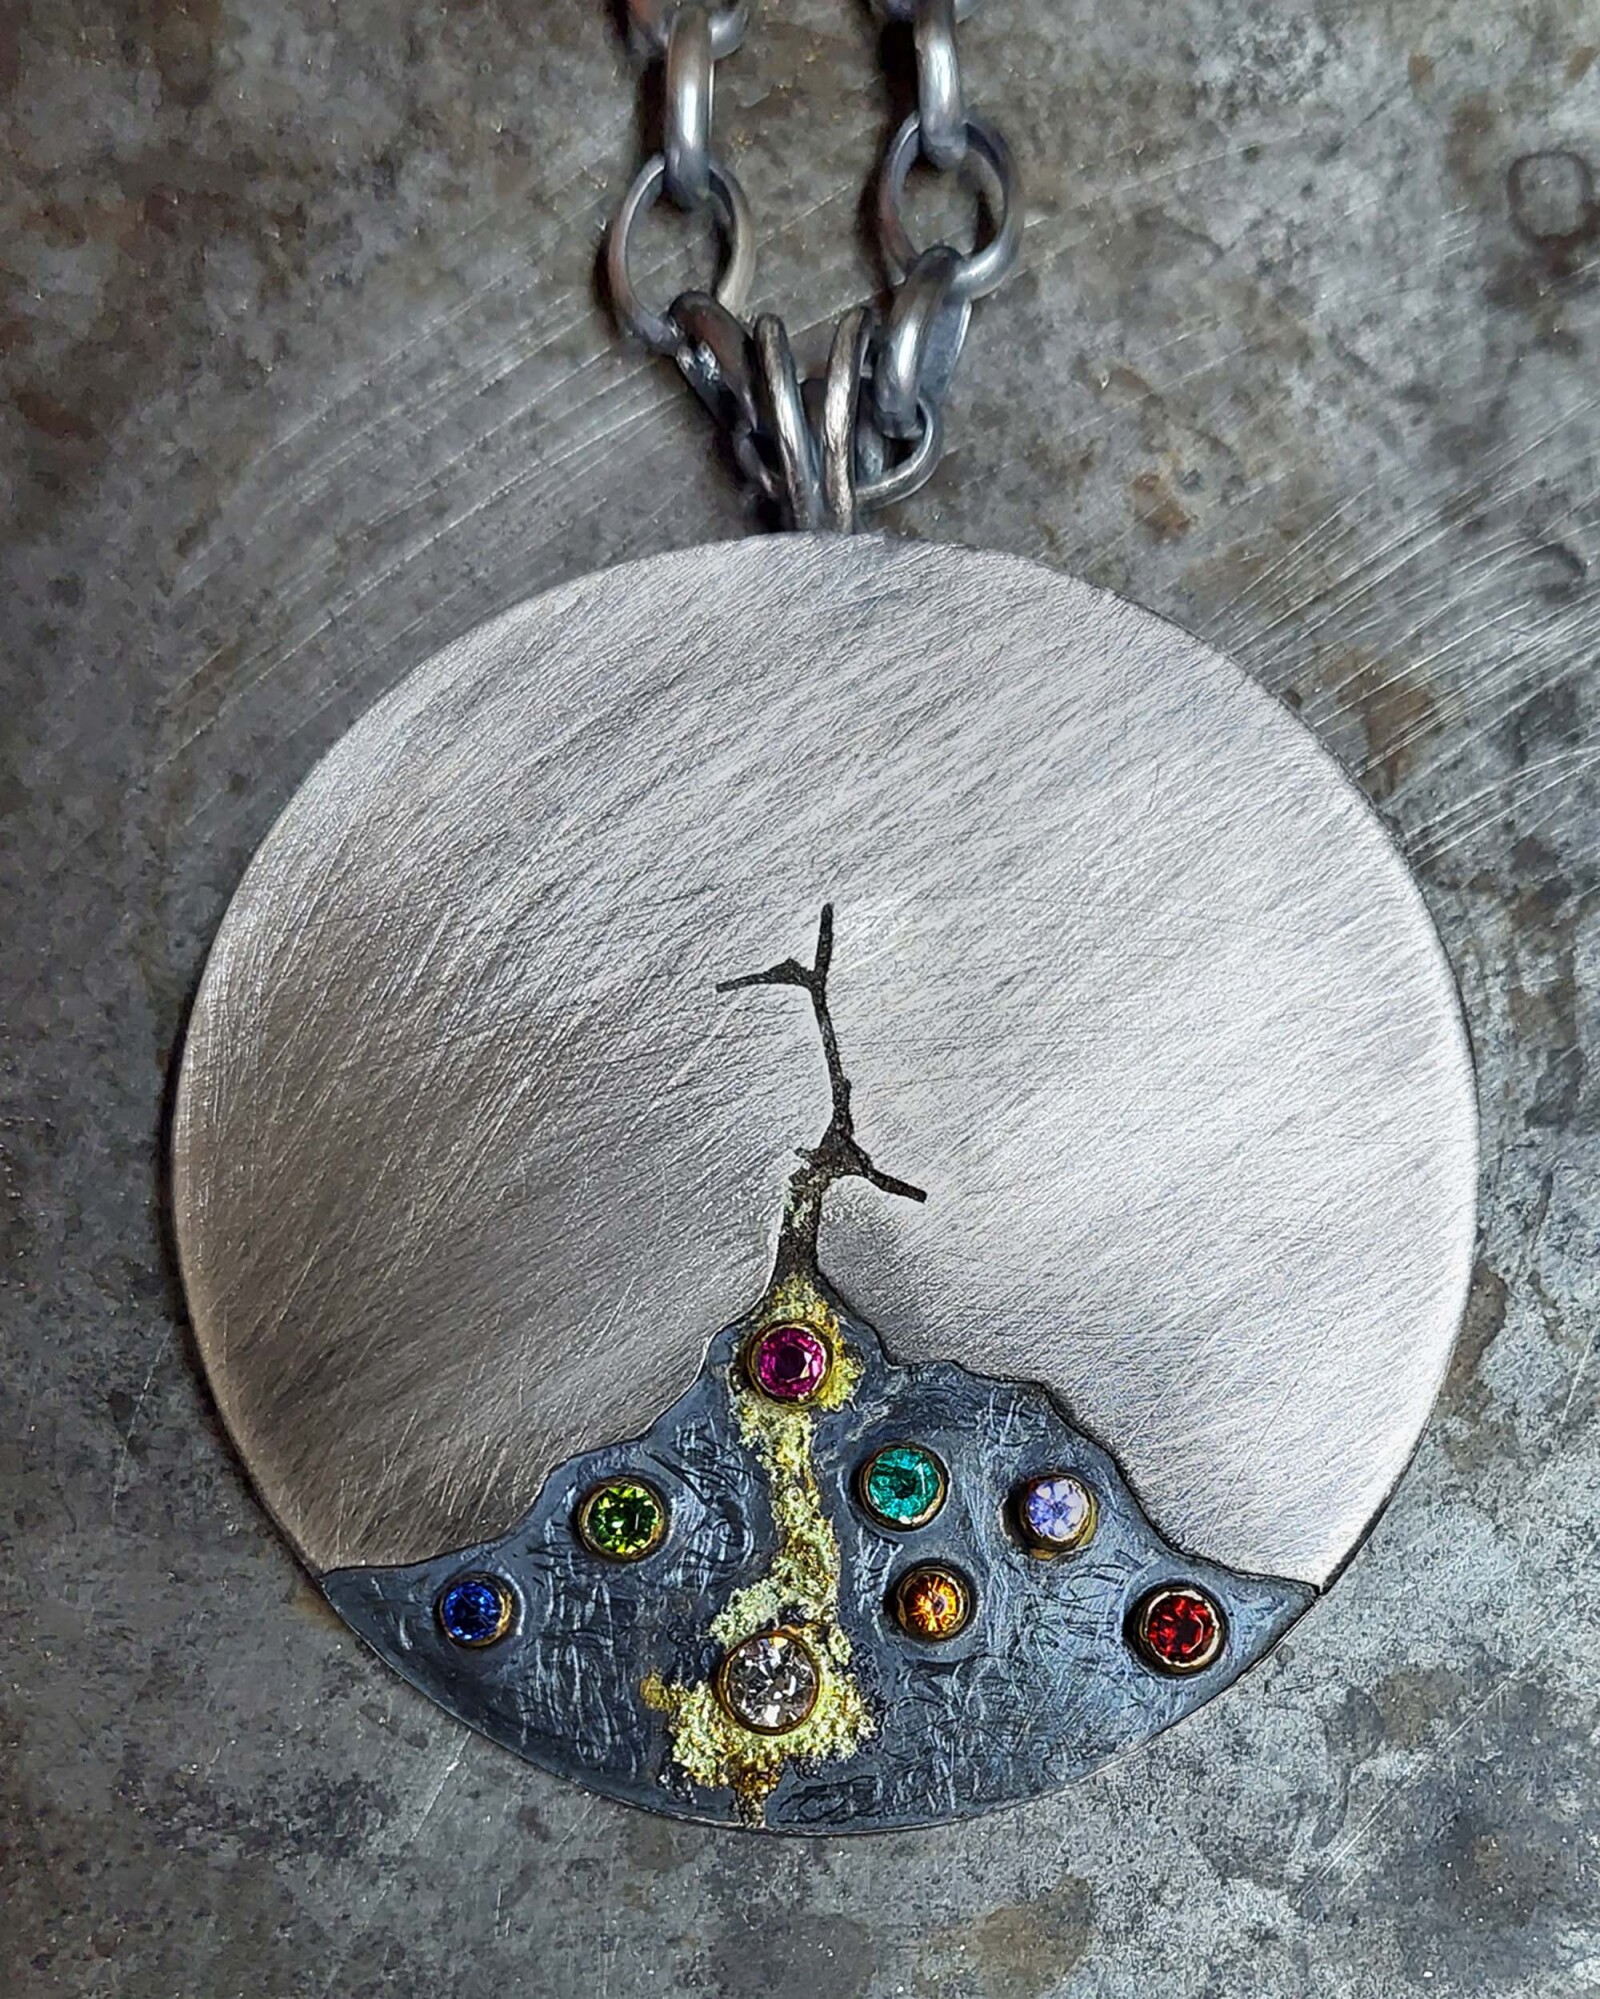 A circular silver pendant on a chain, placed on a grey stone background